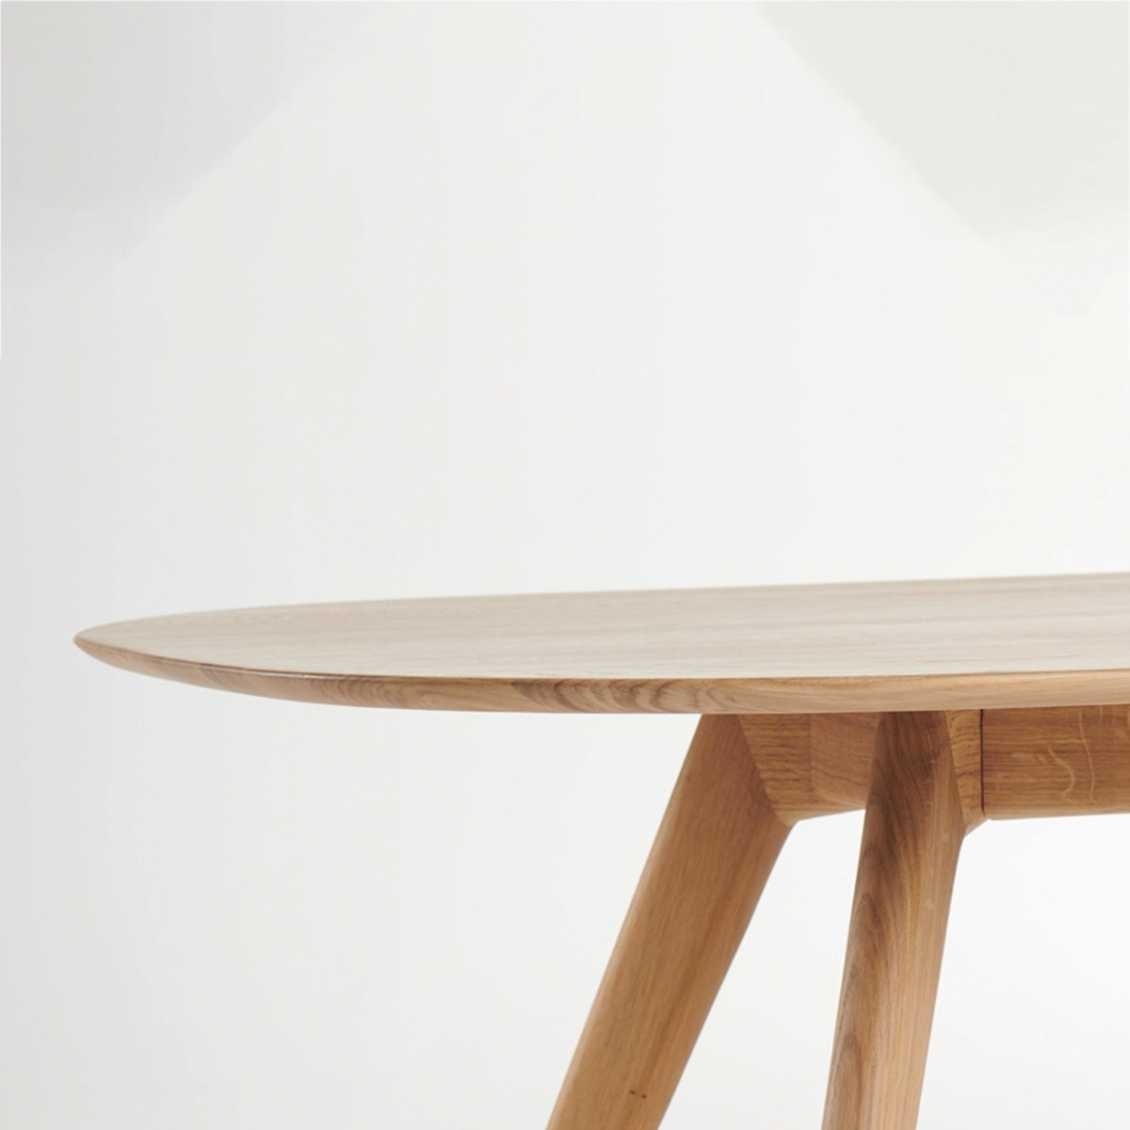 ARTISAN Coco dining table